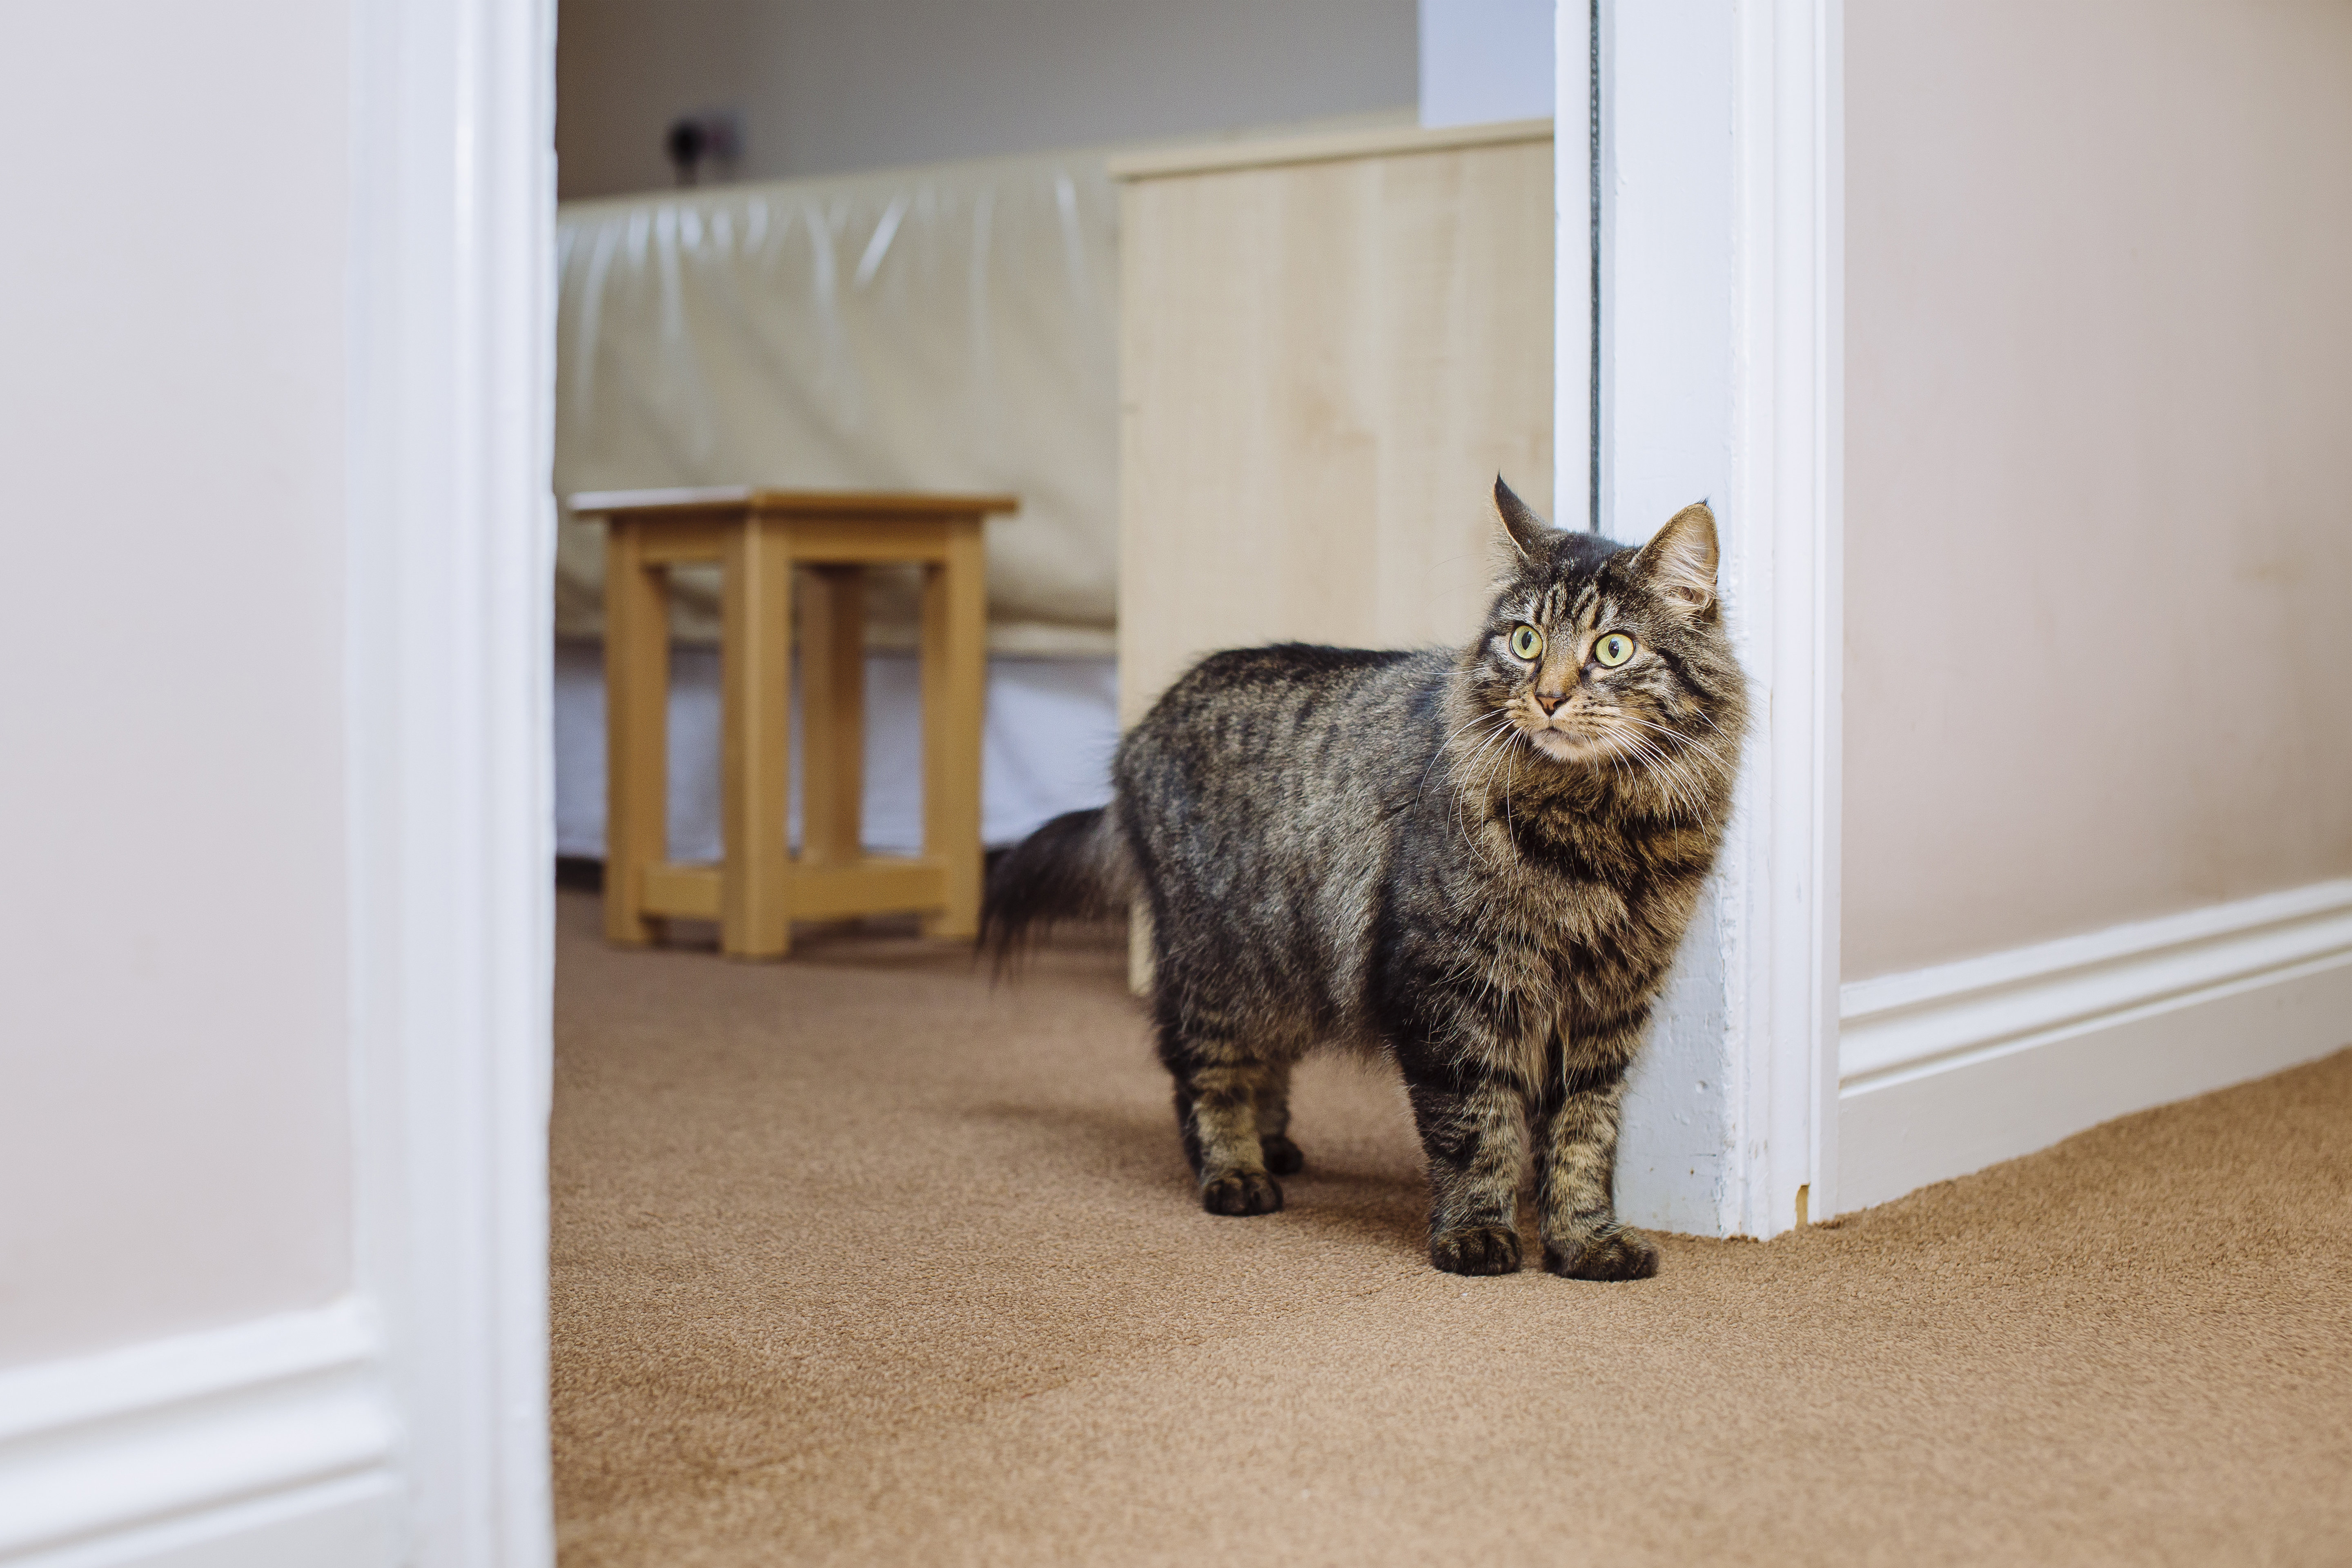 Libby makes her way around the residents' bedrooms to say hello